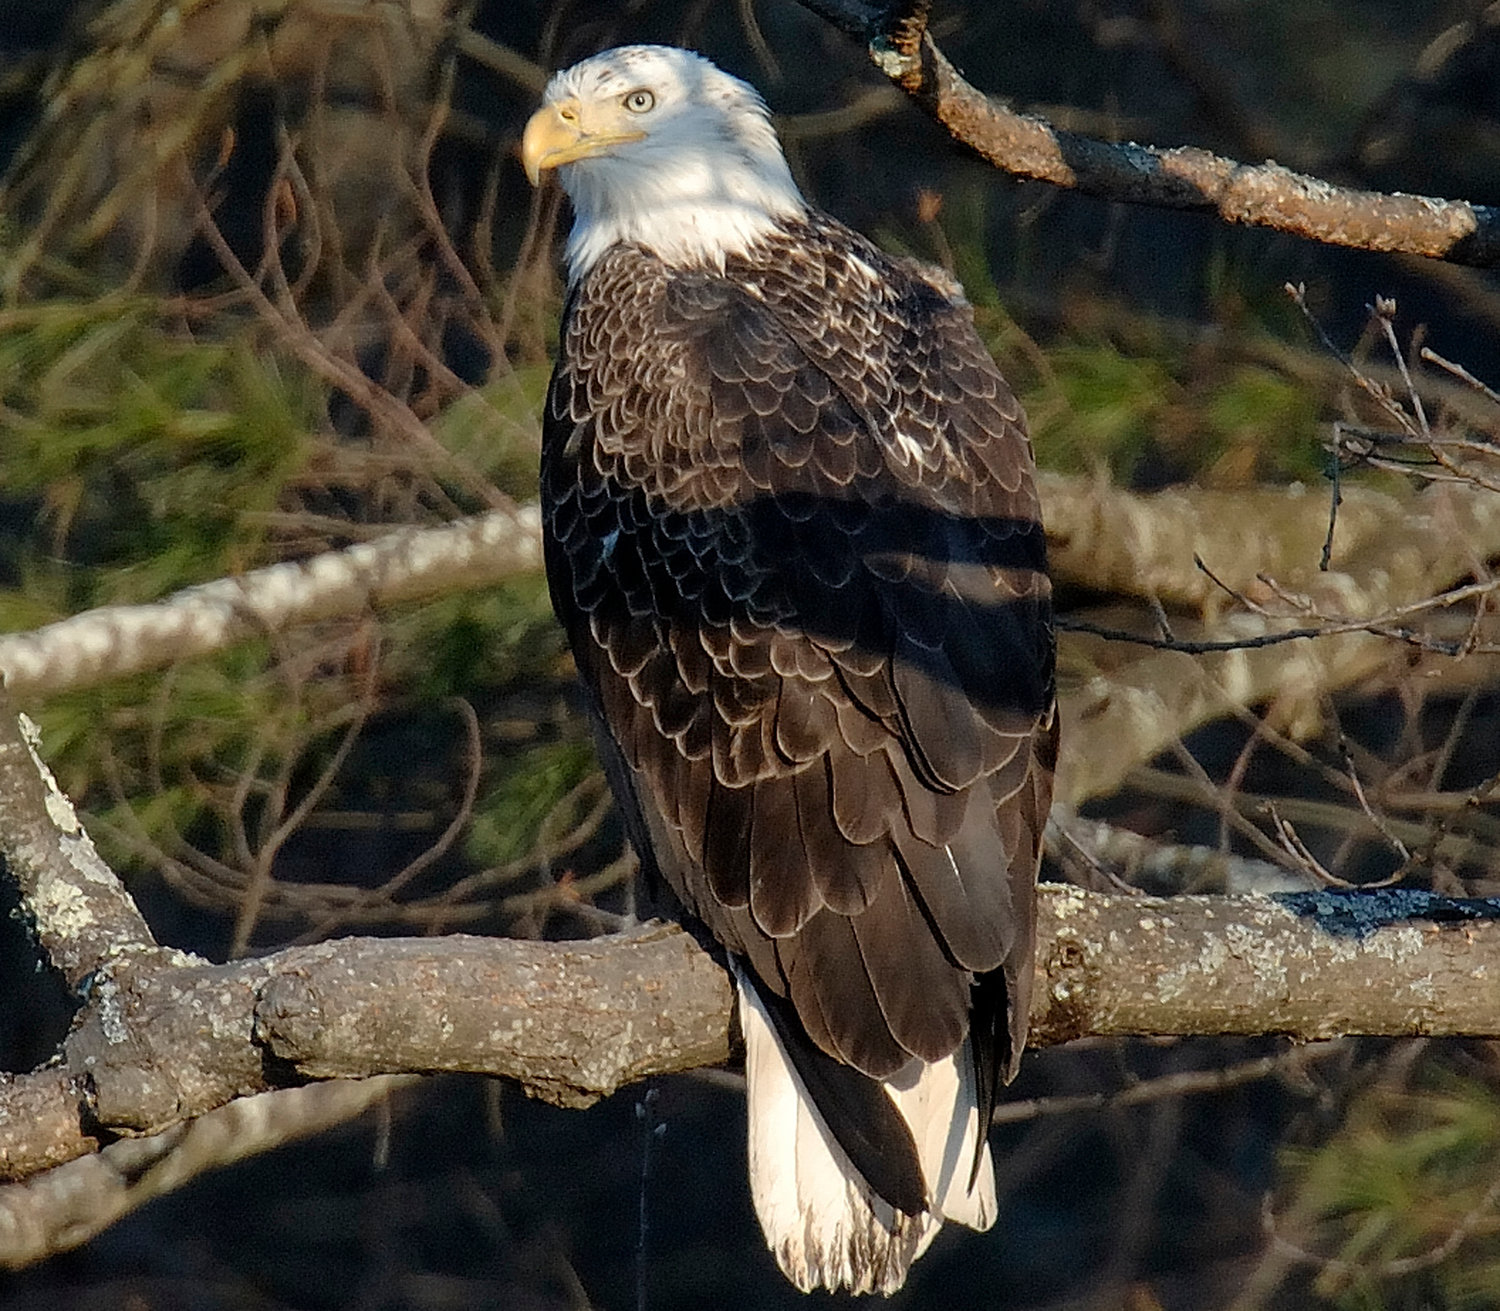 After four to five years, eagles become adults and will seek a mate and a territory. Immediately before this, they are considered subadults and have plumage with light streaks in the brown or dark streaks in the white. This subadult shows just a hint of dark streaking on the head and the end of the tail as well as light speckling on the back. Subadults are frequently seen as part of breeding pairs.